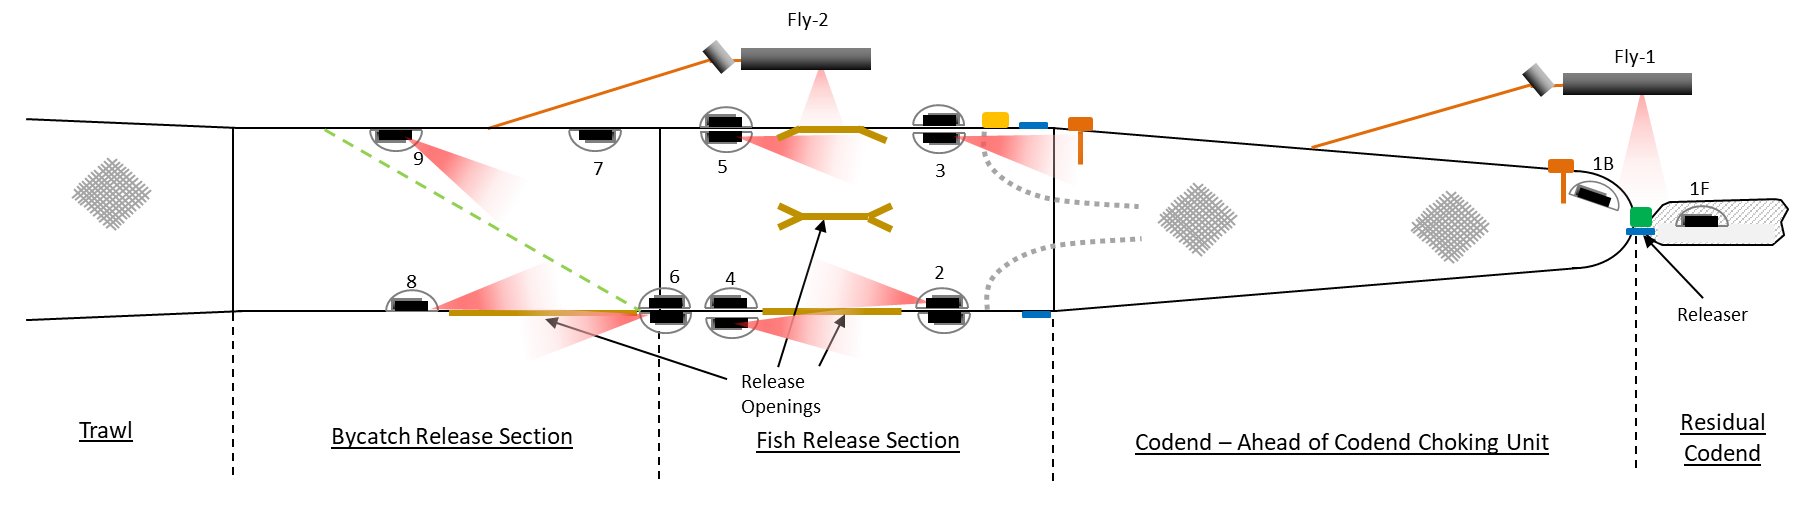 Figure A2 – Camera positions on the Catch Control Rigs and Cod-end.  Post-script F means the camera was forward facing (toward the mouth of the trawl) and post-script B means the camera was backwards facing (towards the cod-end).  The red shaded triangles provide an approximate indication of the illuminating light field in some example positions.  See sections 3, 4, 5 and 8 for further explanation of the fishing gear components.  